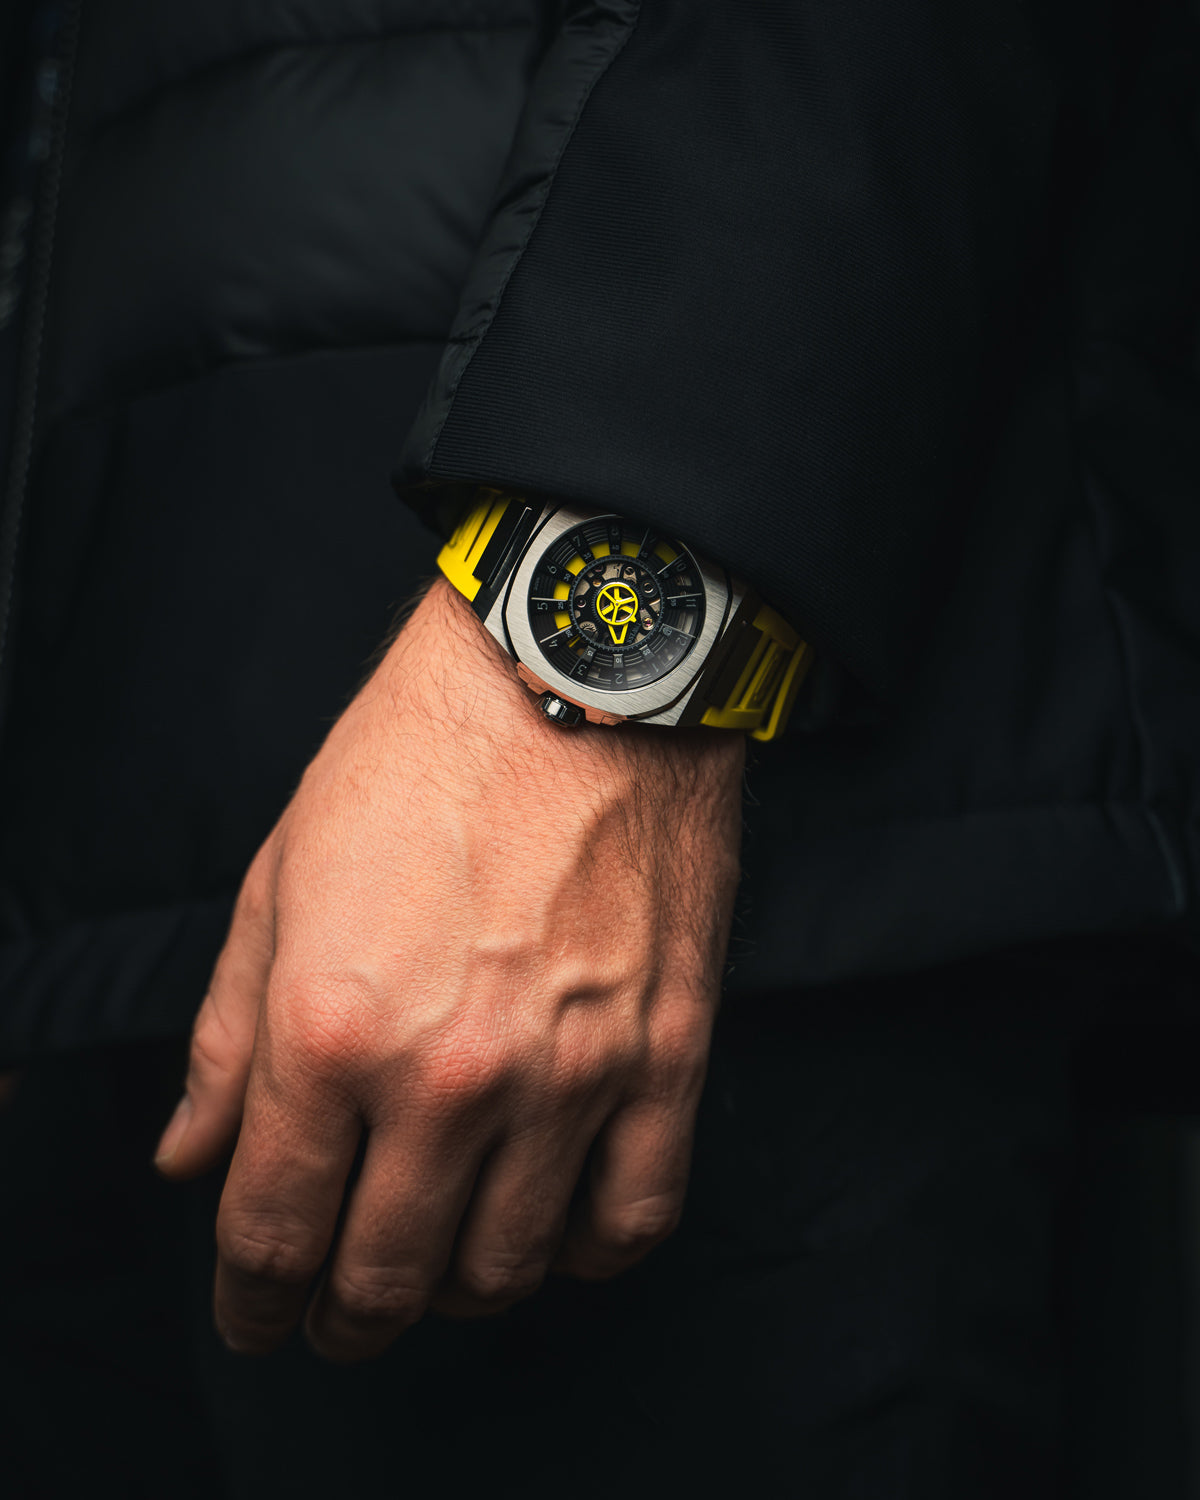 DWISS M3S yellow - FKM yellow rubber strap, swiss made design awarded watch with DWISS signature mysterious hours time display and sapphire crystal